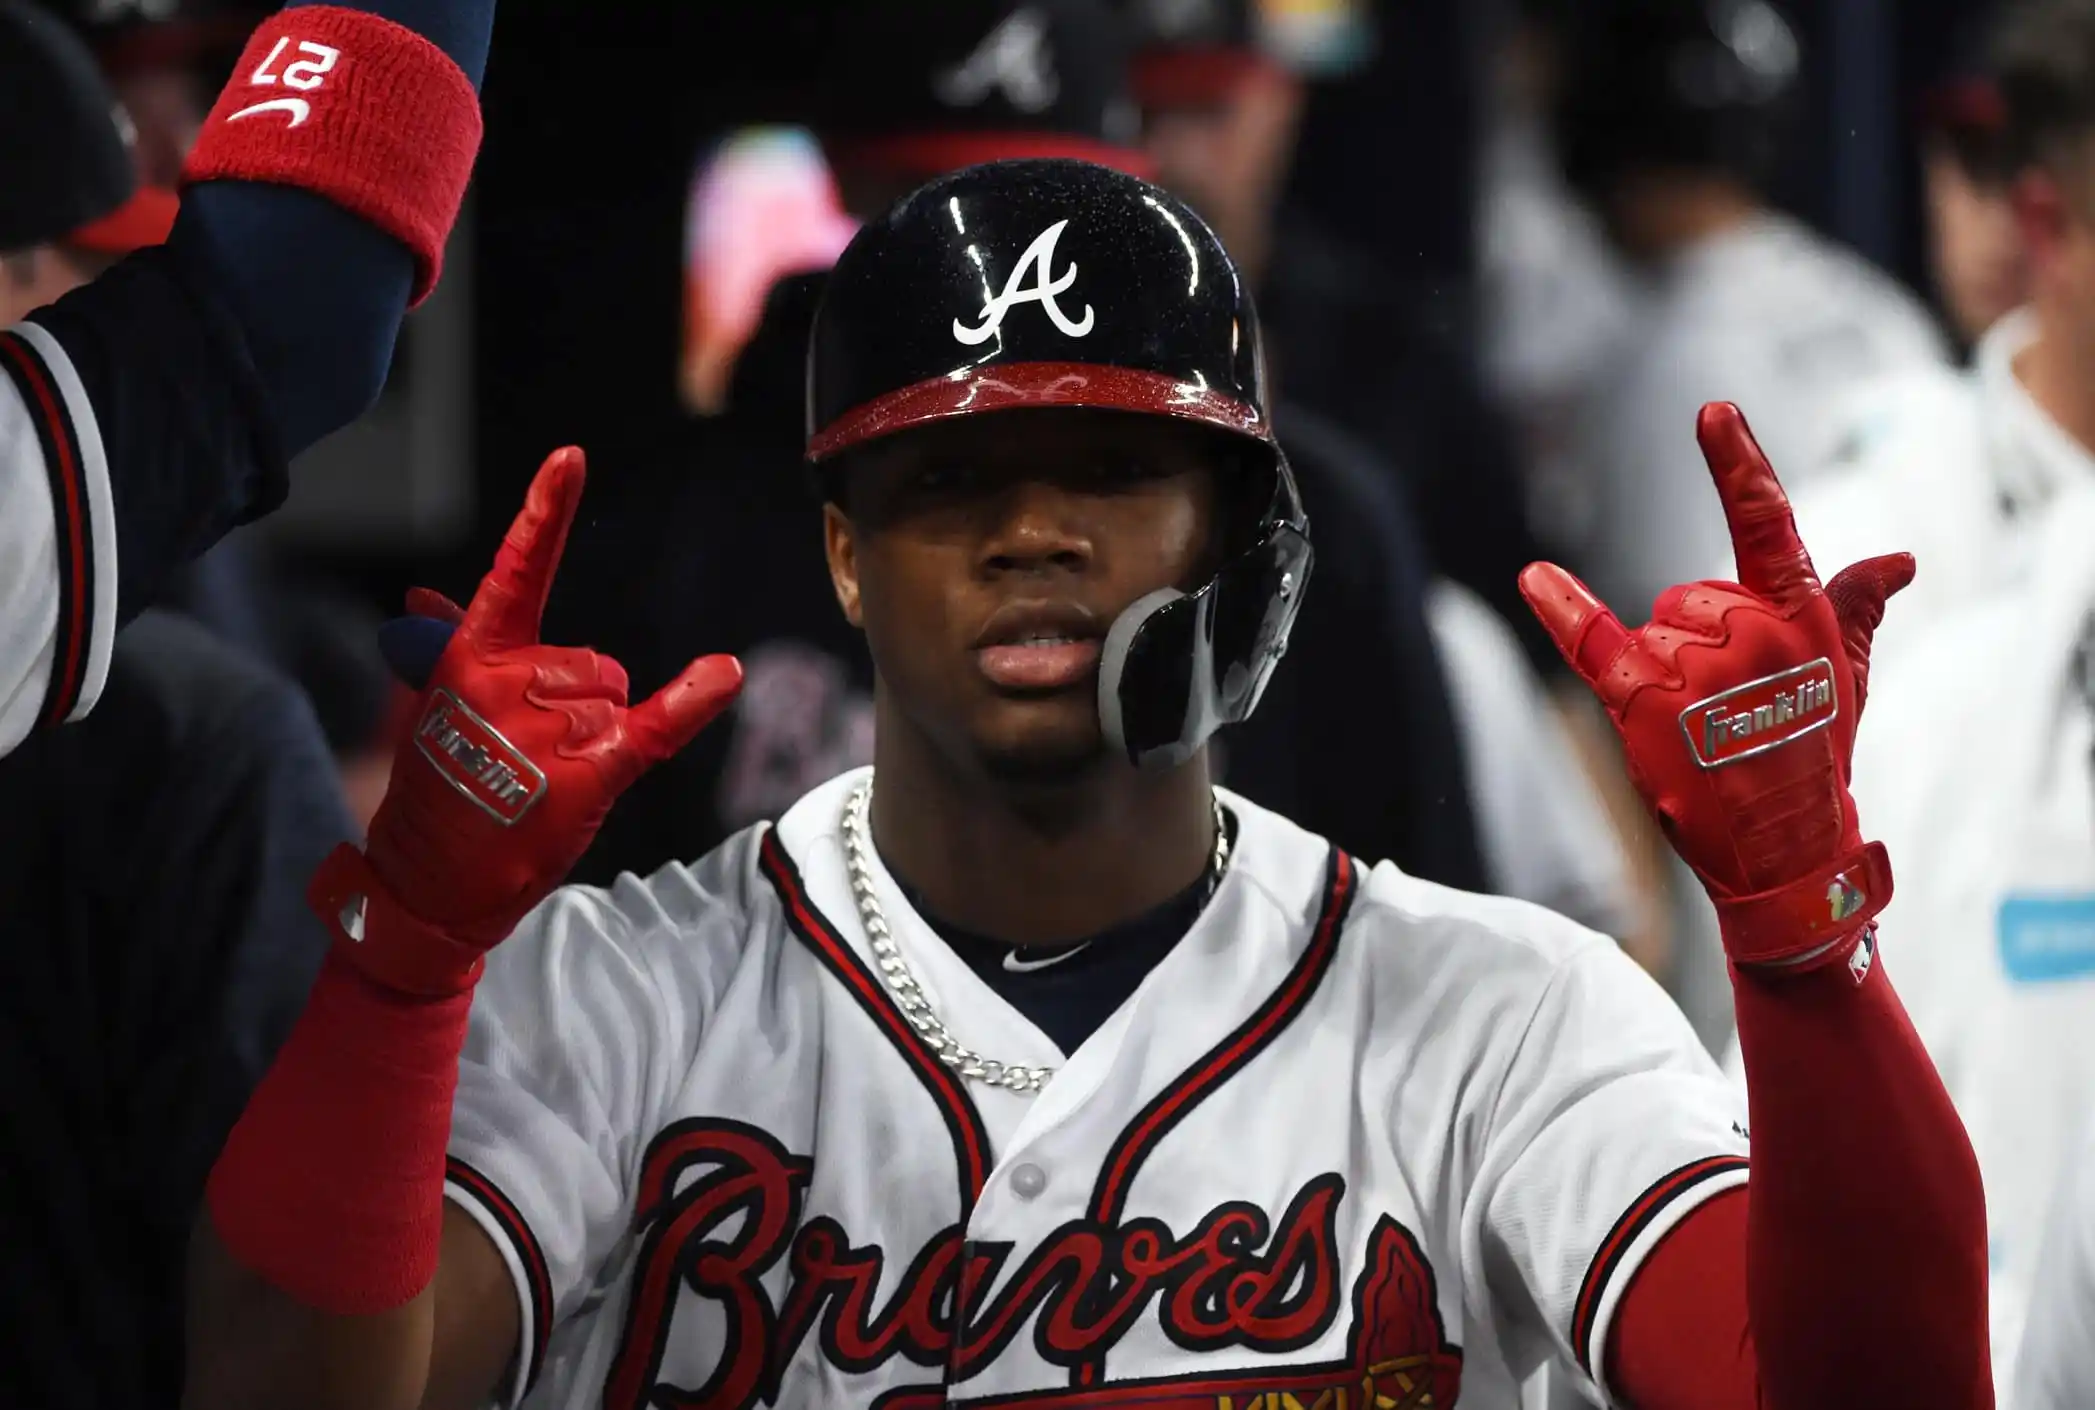 WATCH Ronald Acuna with epic bat flip after gametying HR in ninth inning